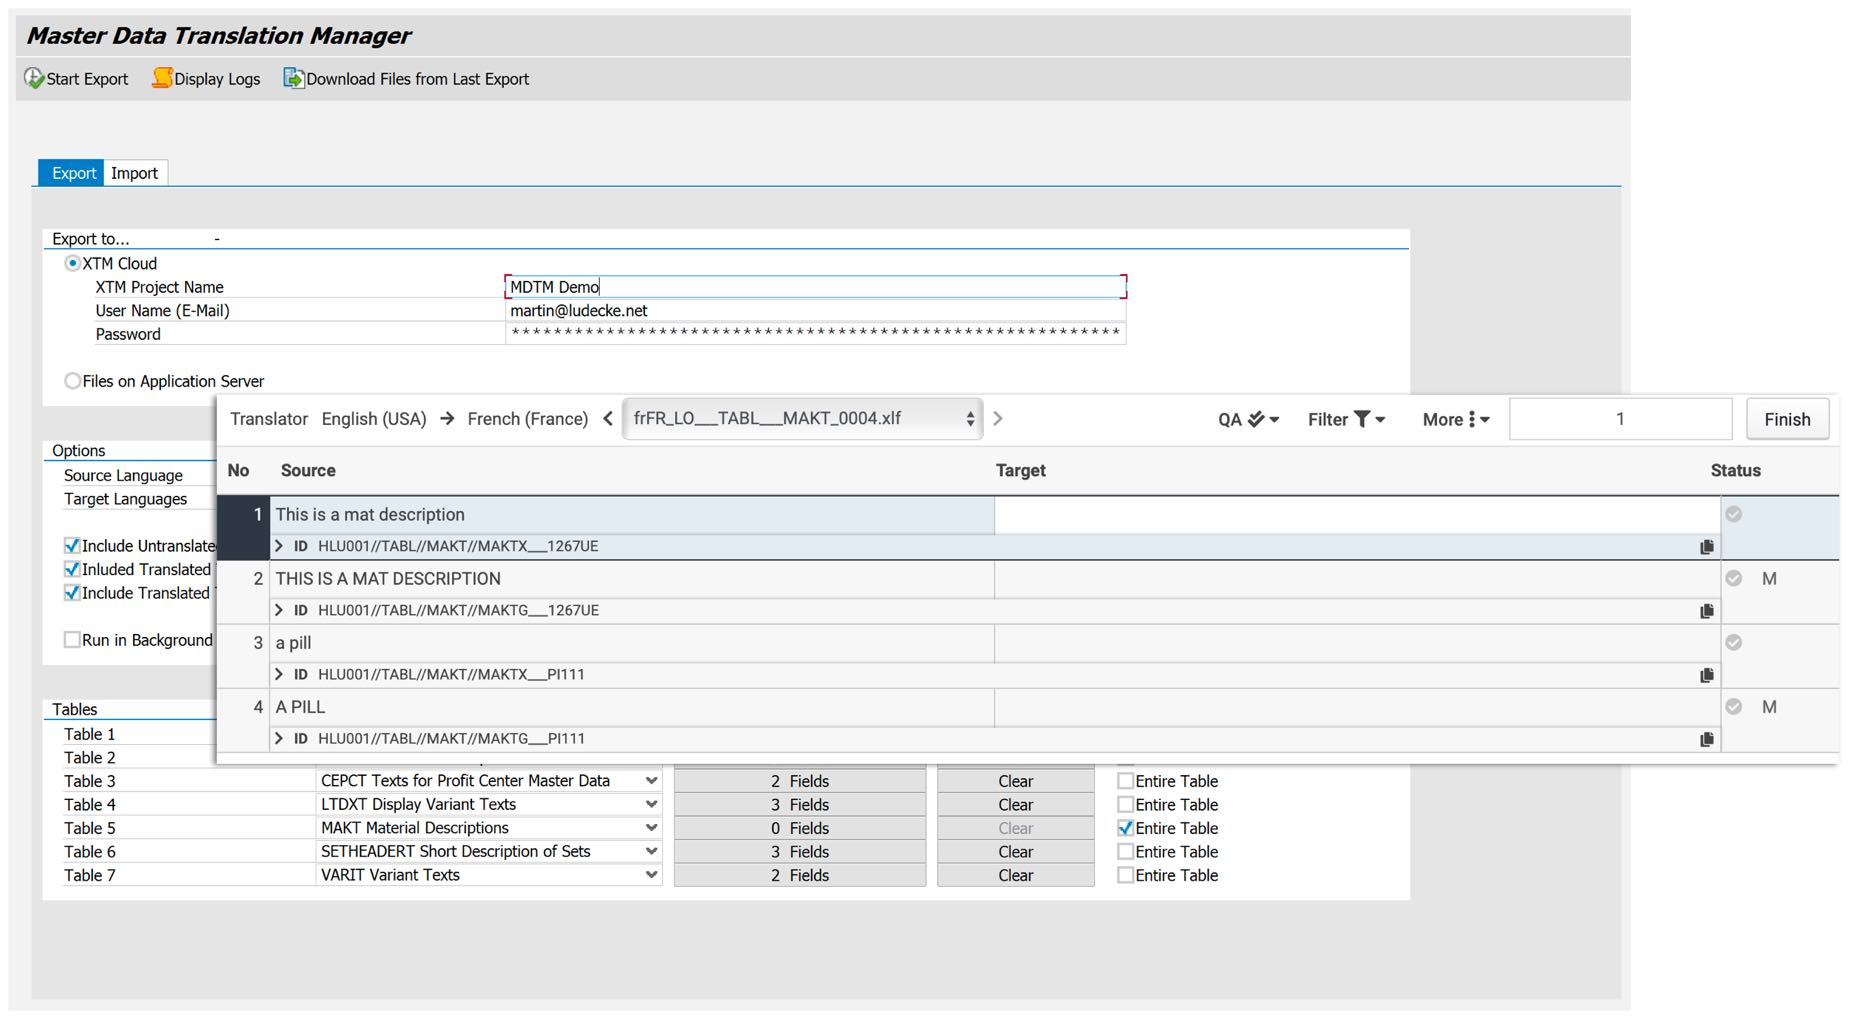 Initial screen of Master Data Translation Manager, when exporting.